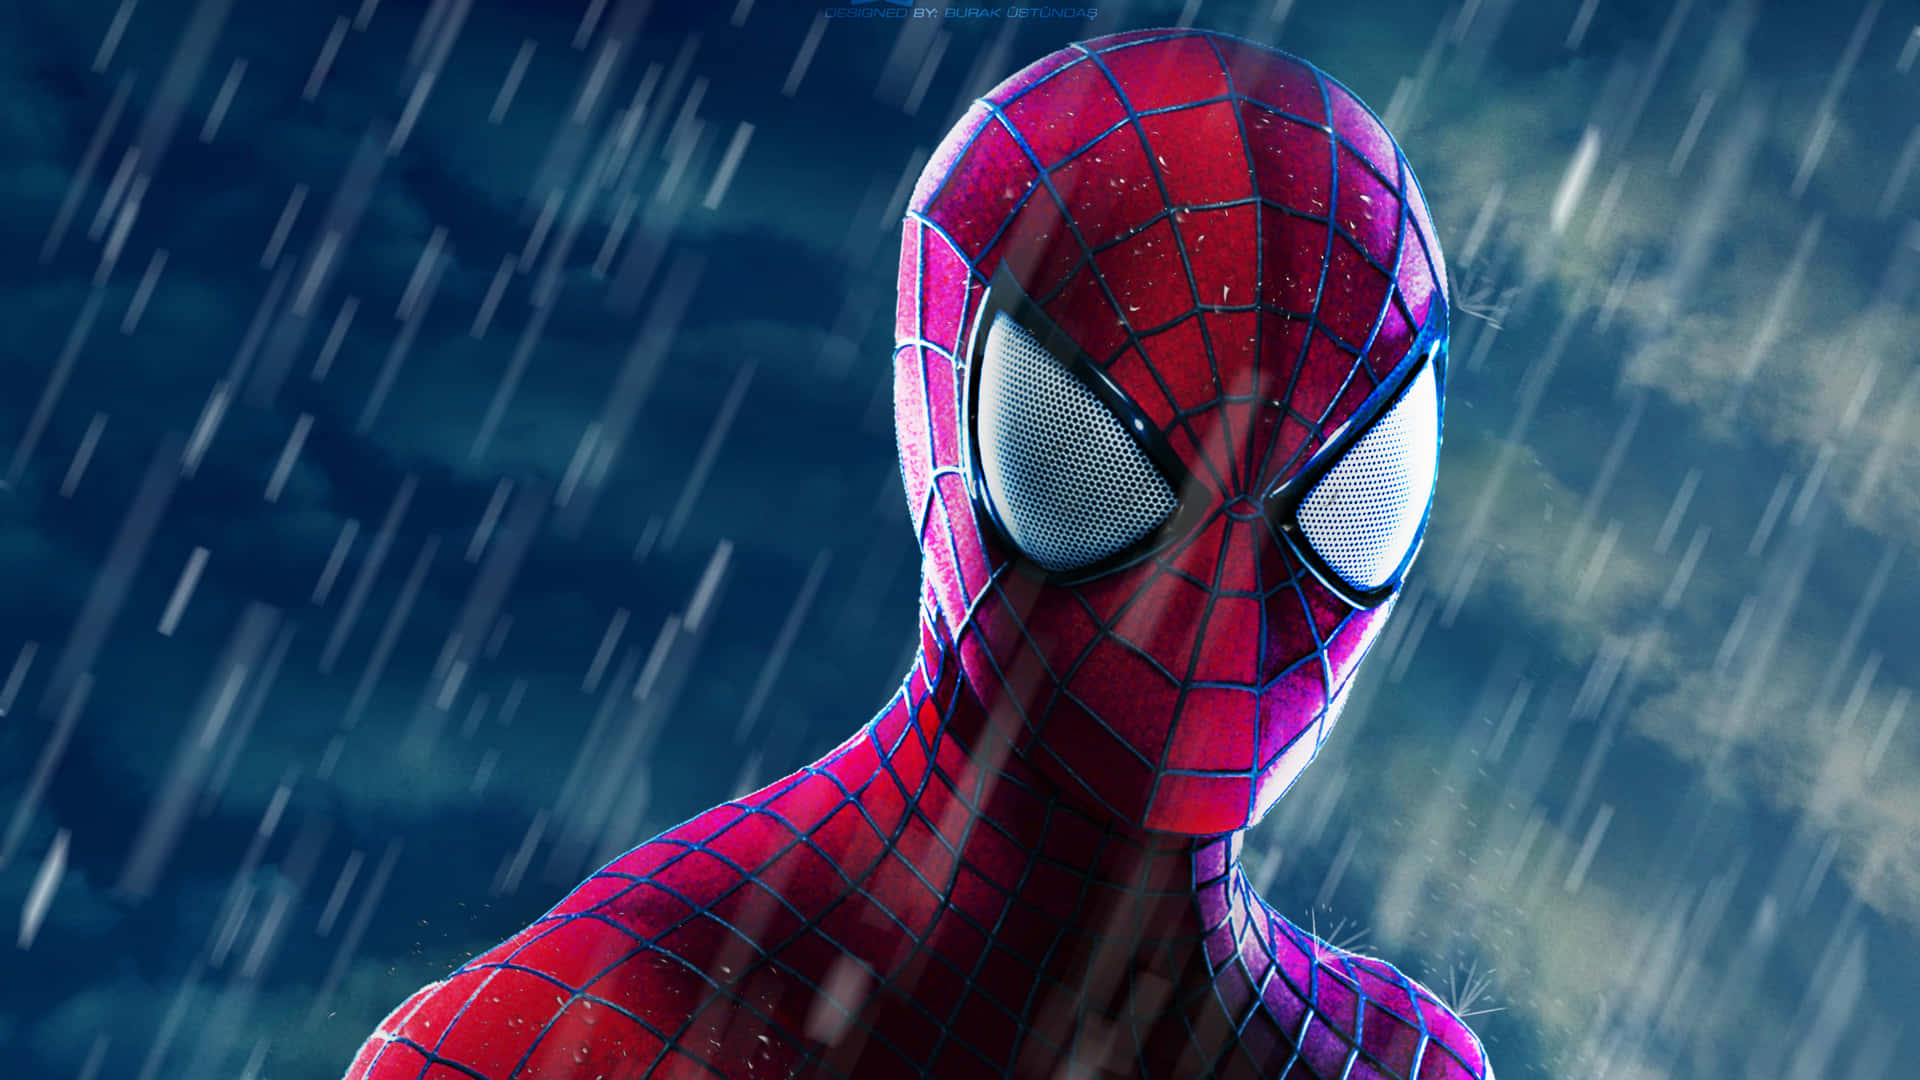 Spider-Man swings into action in Spider-Man 2 Wallpaper